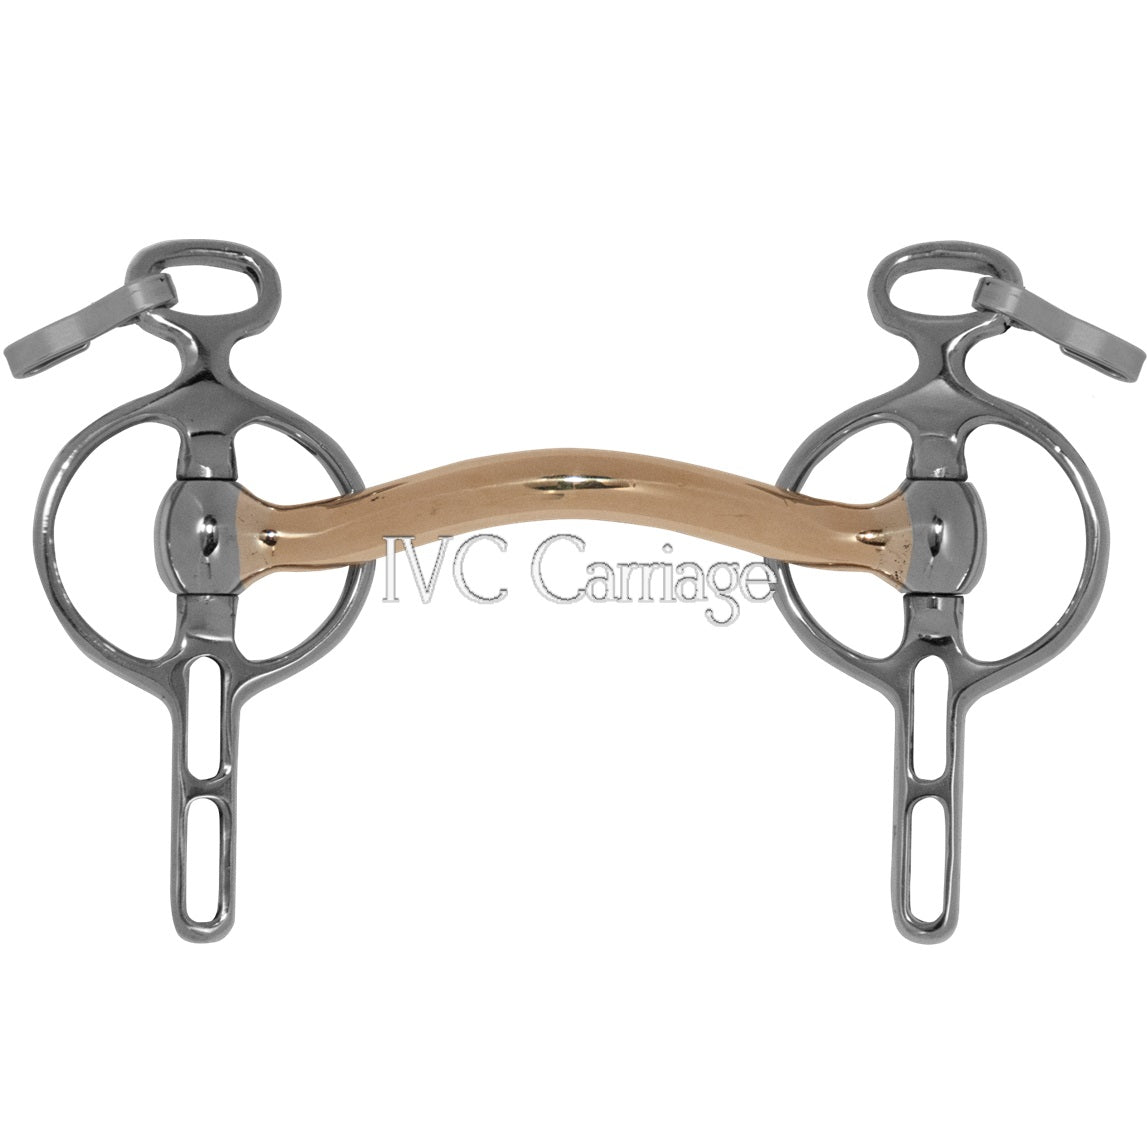 Bowman Victory Liverpool Pony Bit | IVC Carriage